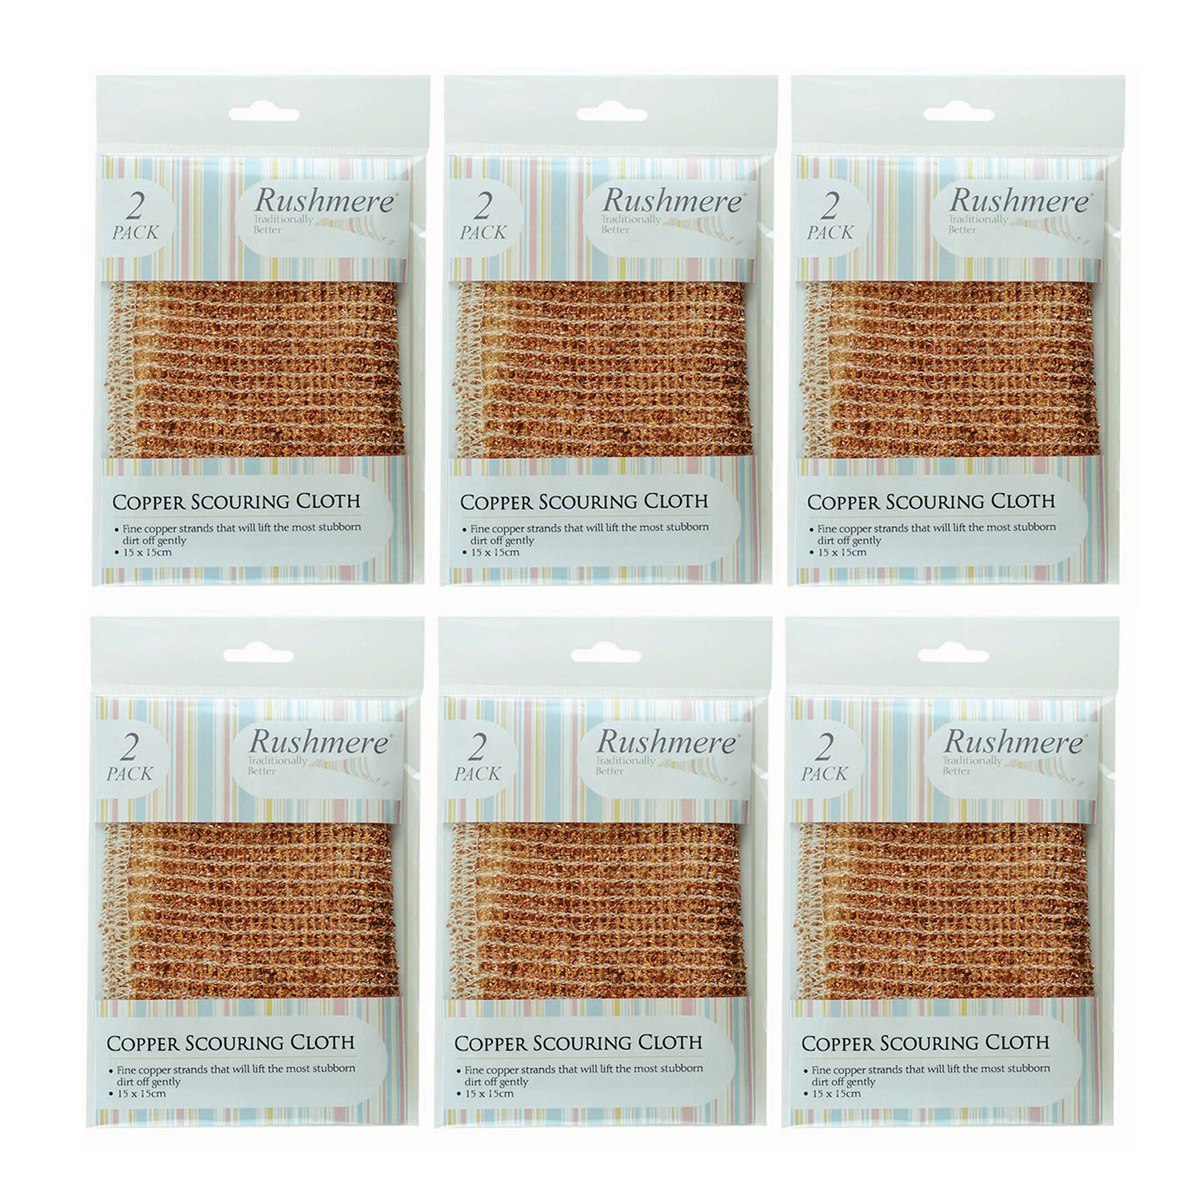 Case of 6 x Rushmere Copper Scouring Cloth 2 Pack